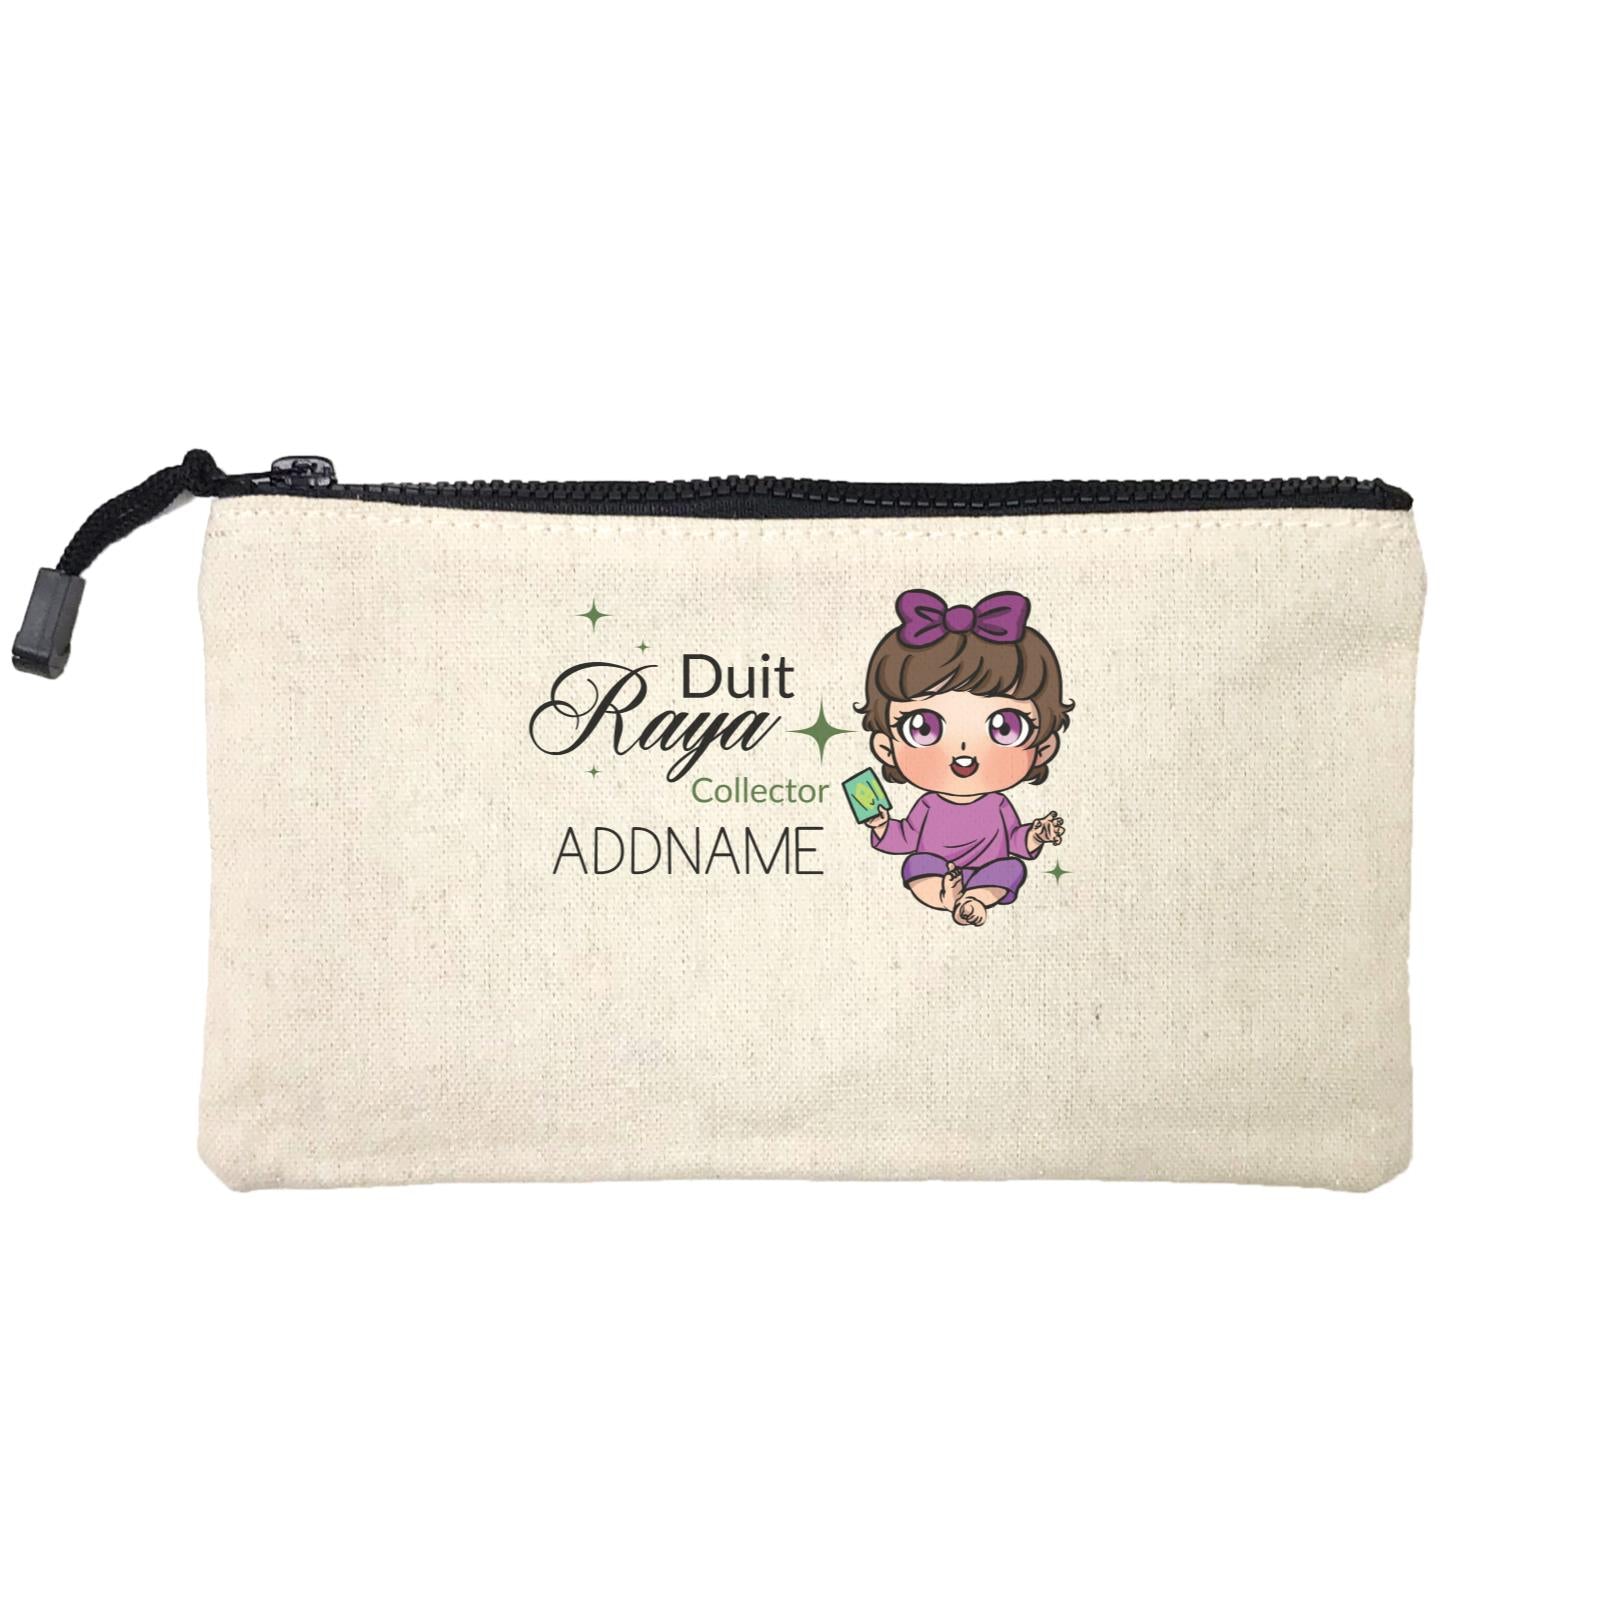 Raya Chibi Baby Baby Girl Duit Raya Collector Addname Mini Accessories Stationery Pouch